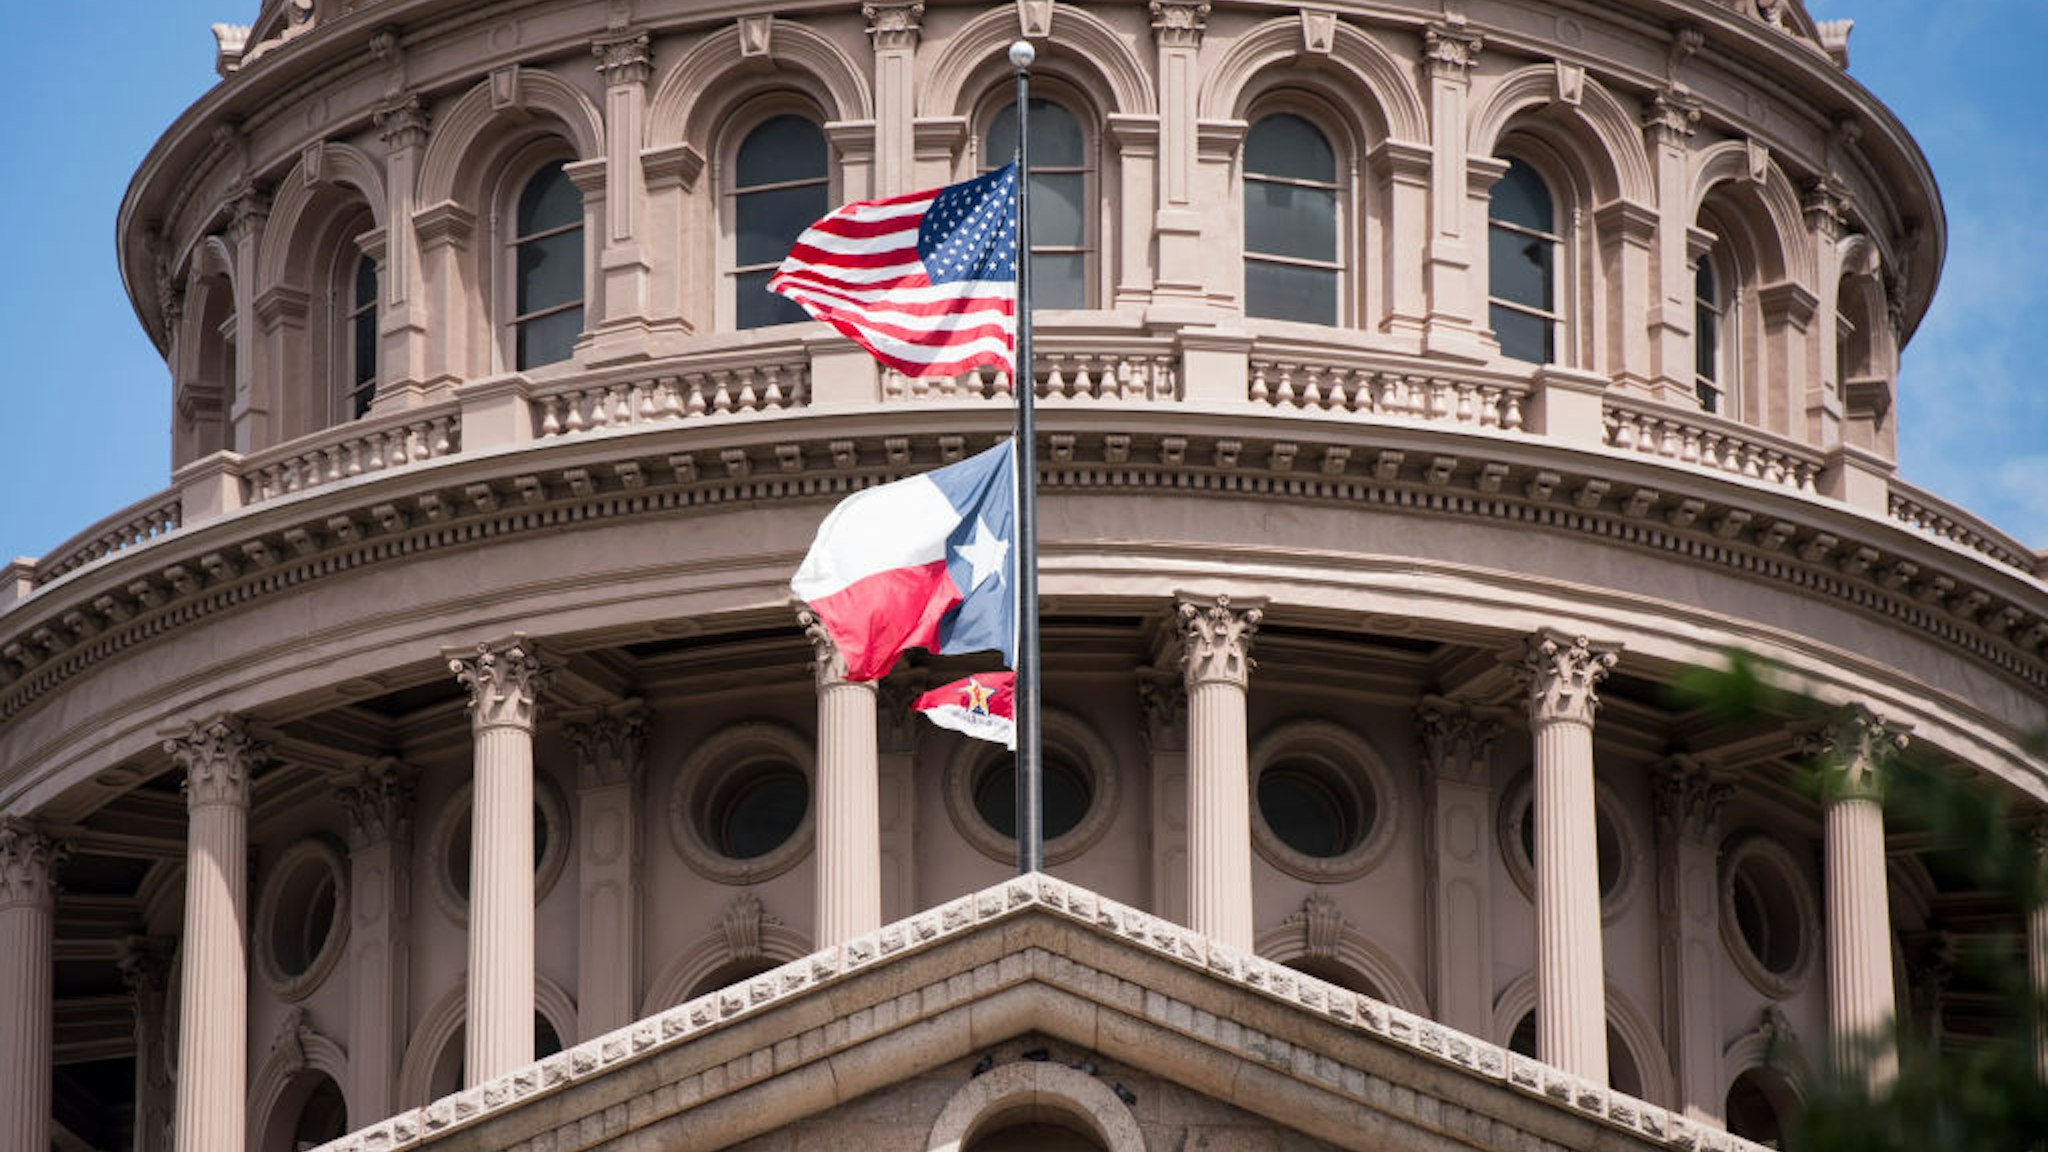 UNITED STATES - SEPTEMBER 30: Texas State Capitol building in Austin, Texas.